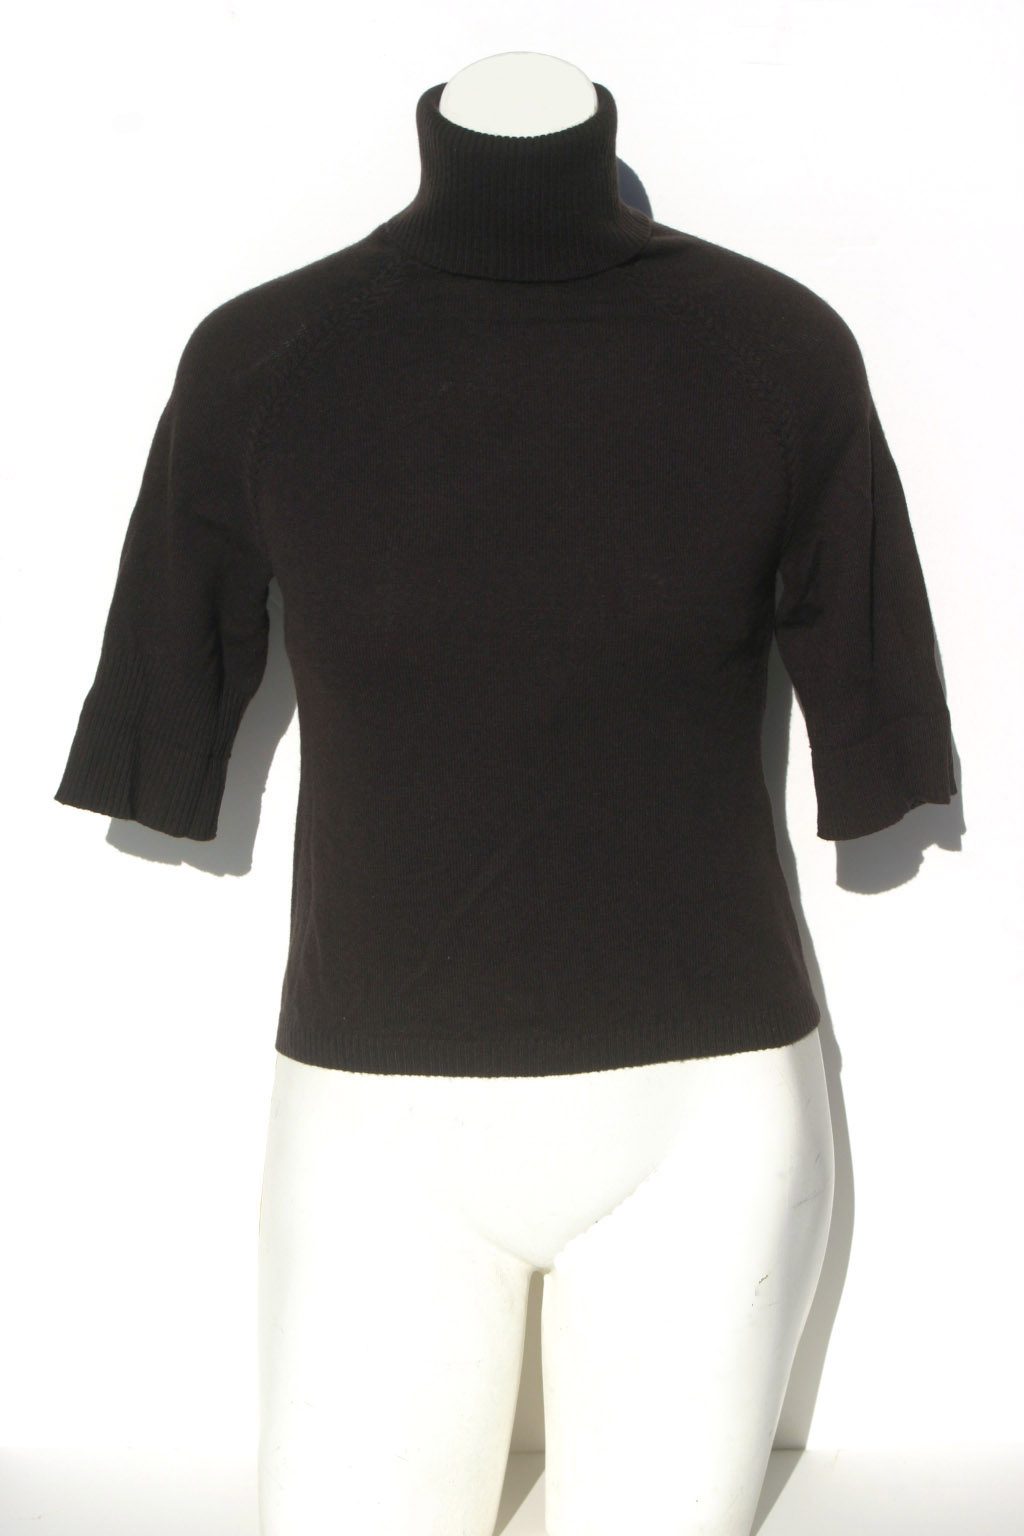 Thrift Shop Sweater Second Hand Theory Womens Med Turtleneck Brown Cashmere